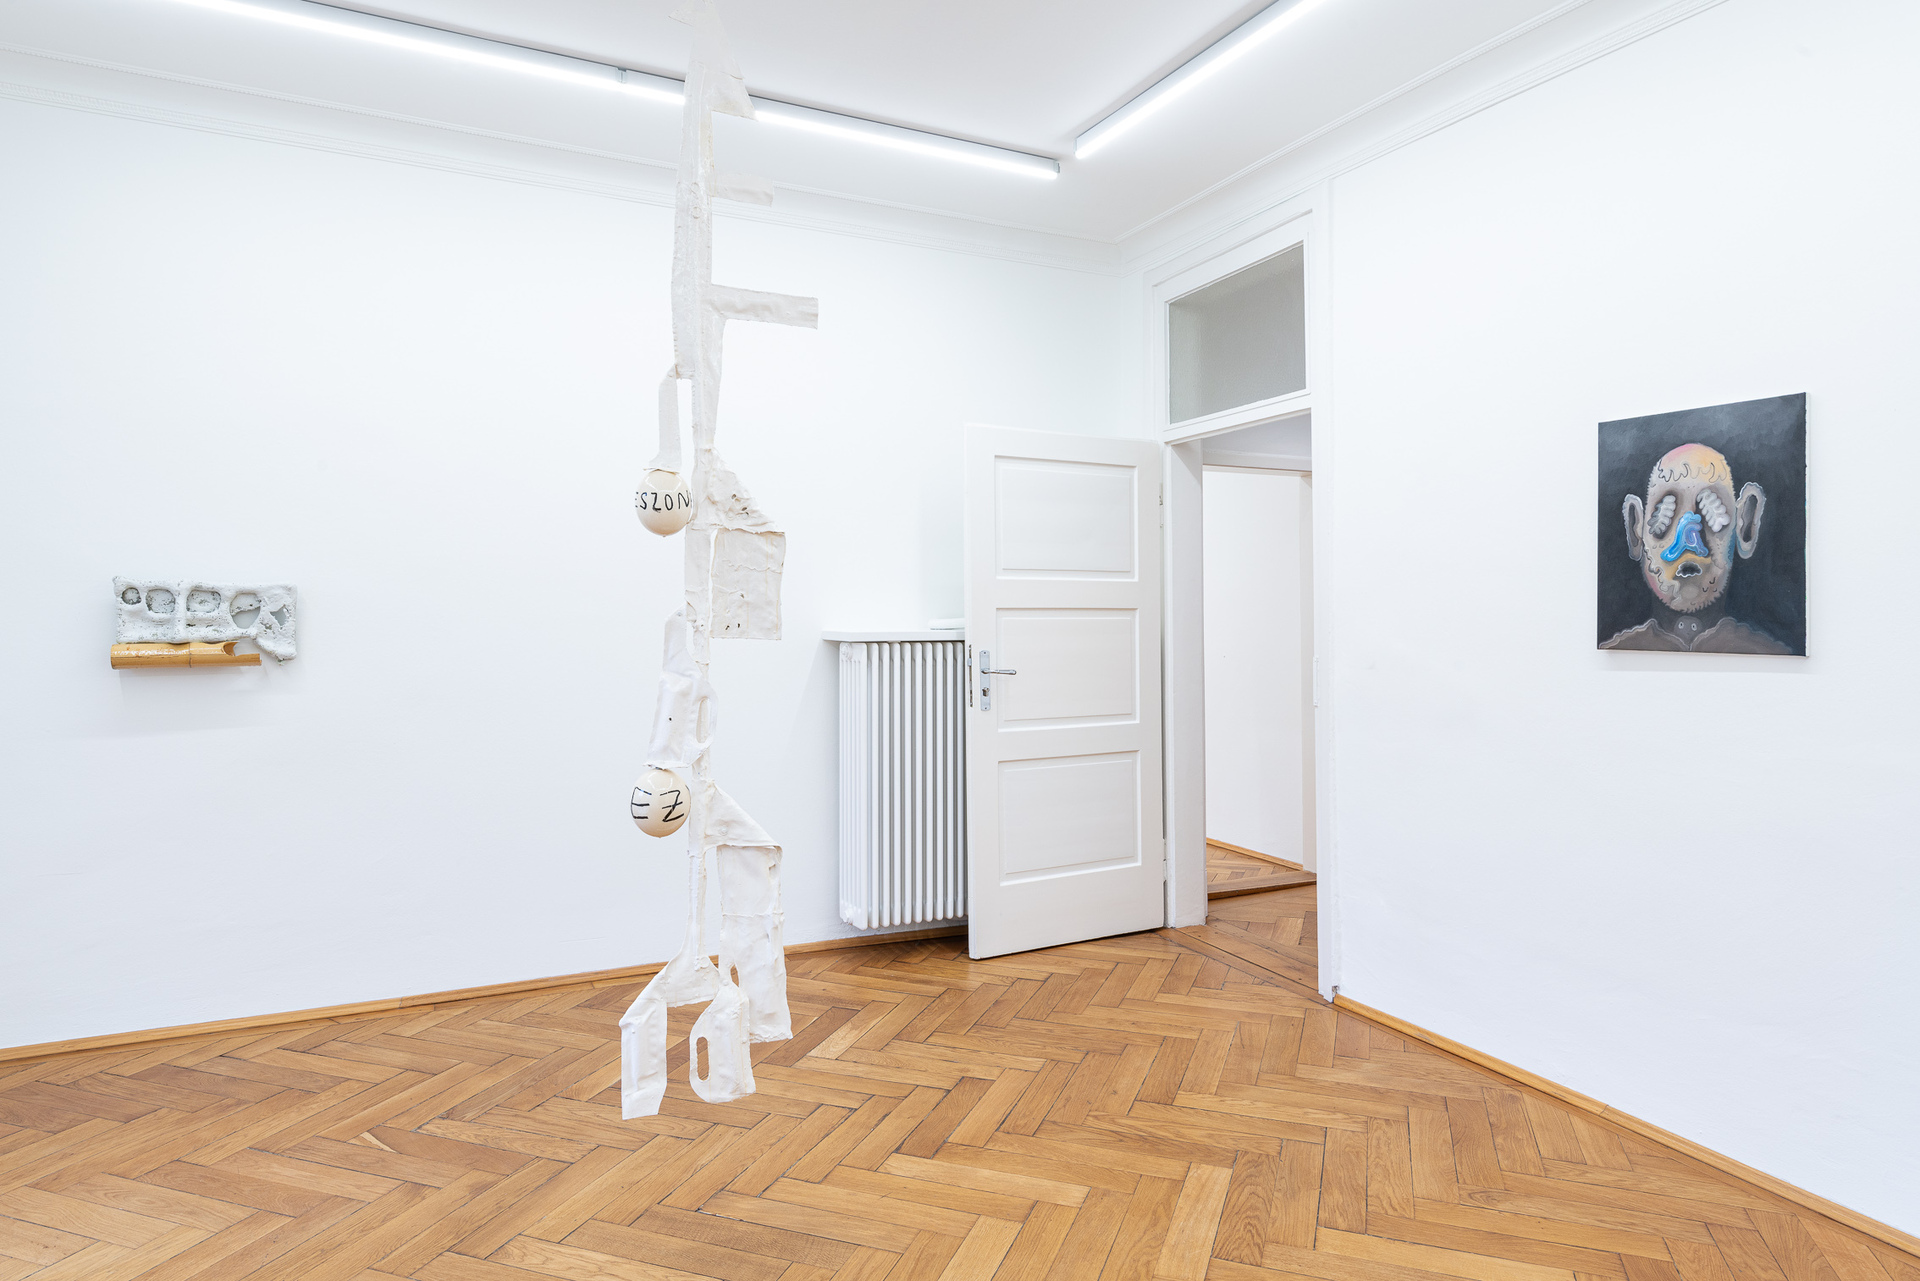 Installation view of the exhibition "On Survival" with works by Alan Stefanato and Piotr Lakomy at Britta Rettberg, 2021.